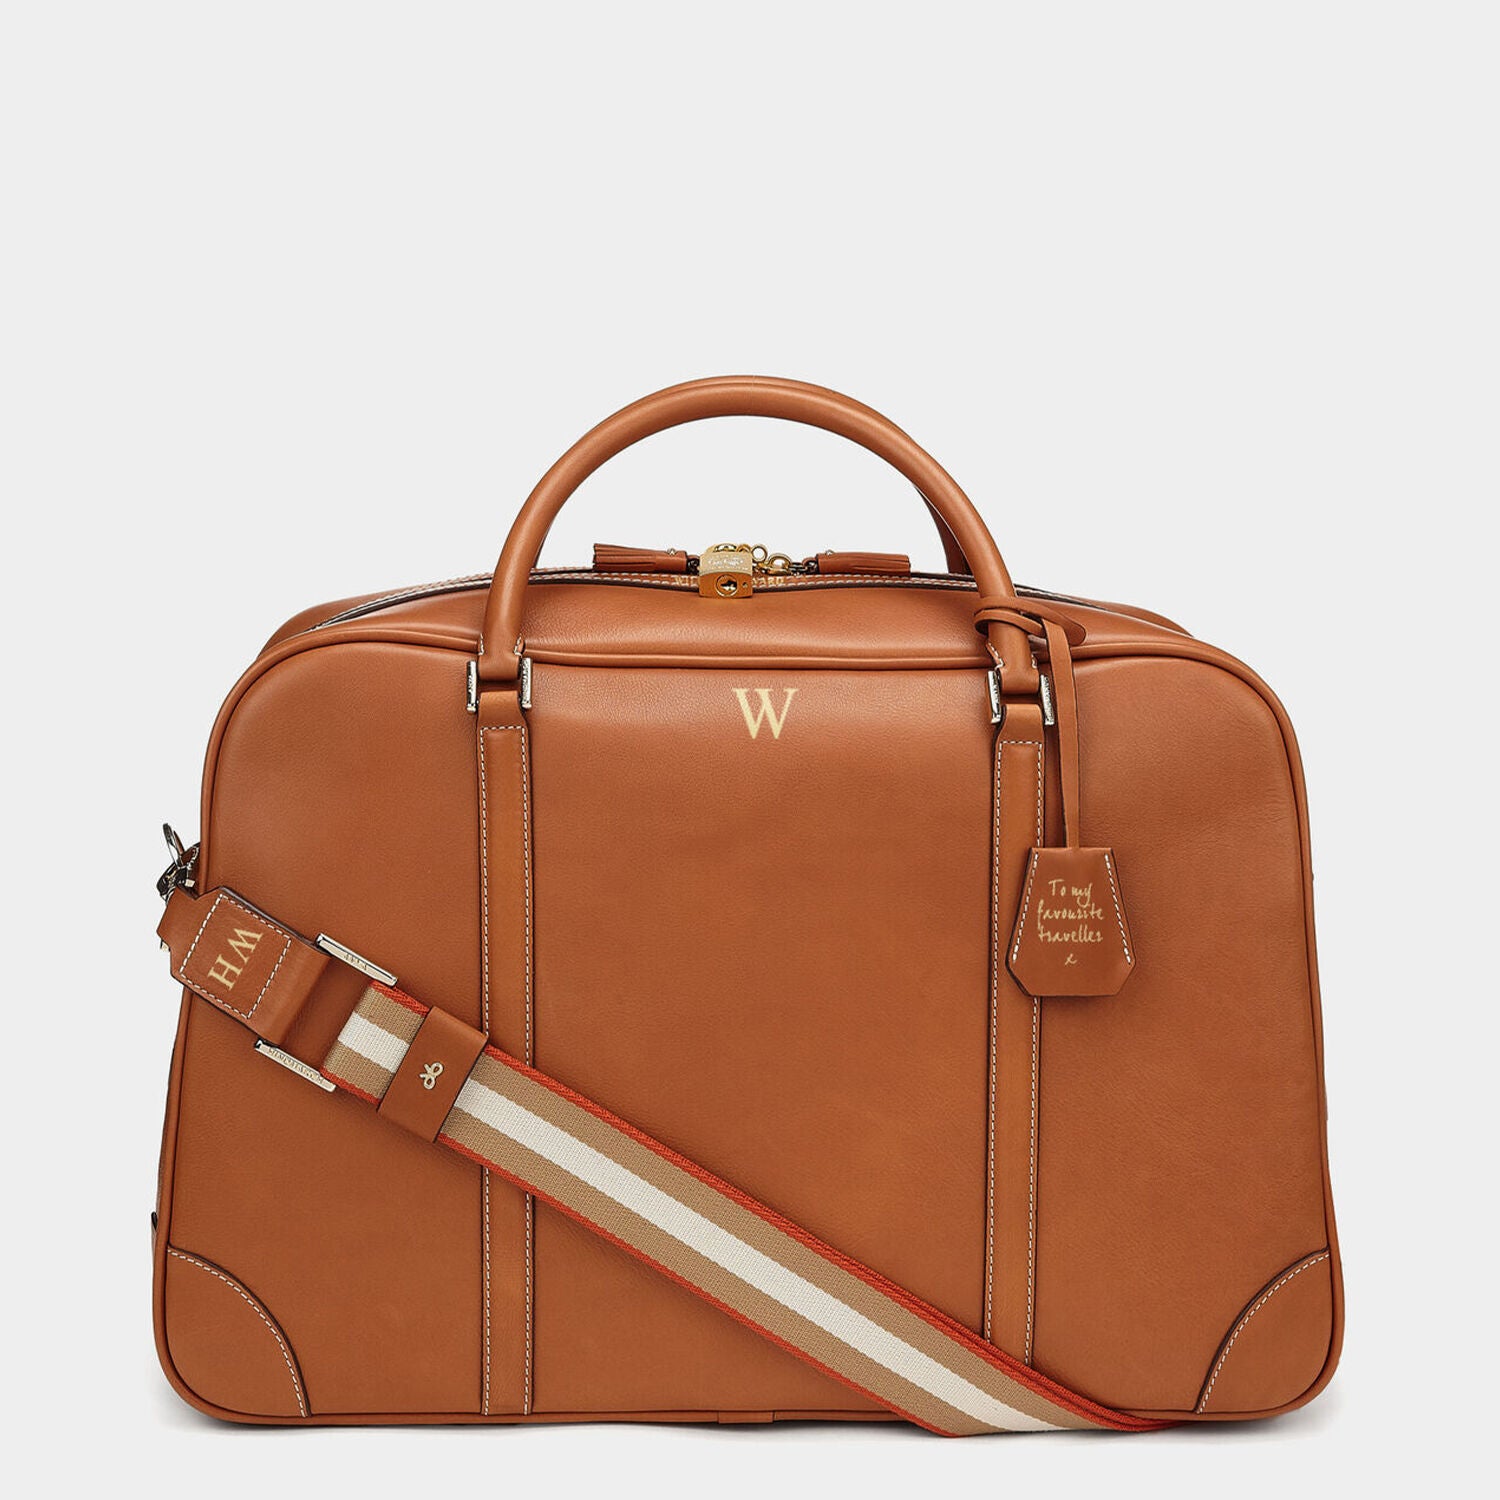 Bespoke Latimer -

                  
                    Butter Leather in Tan -
                  

                  Anya Hindmarch UK
